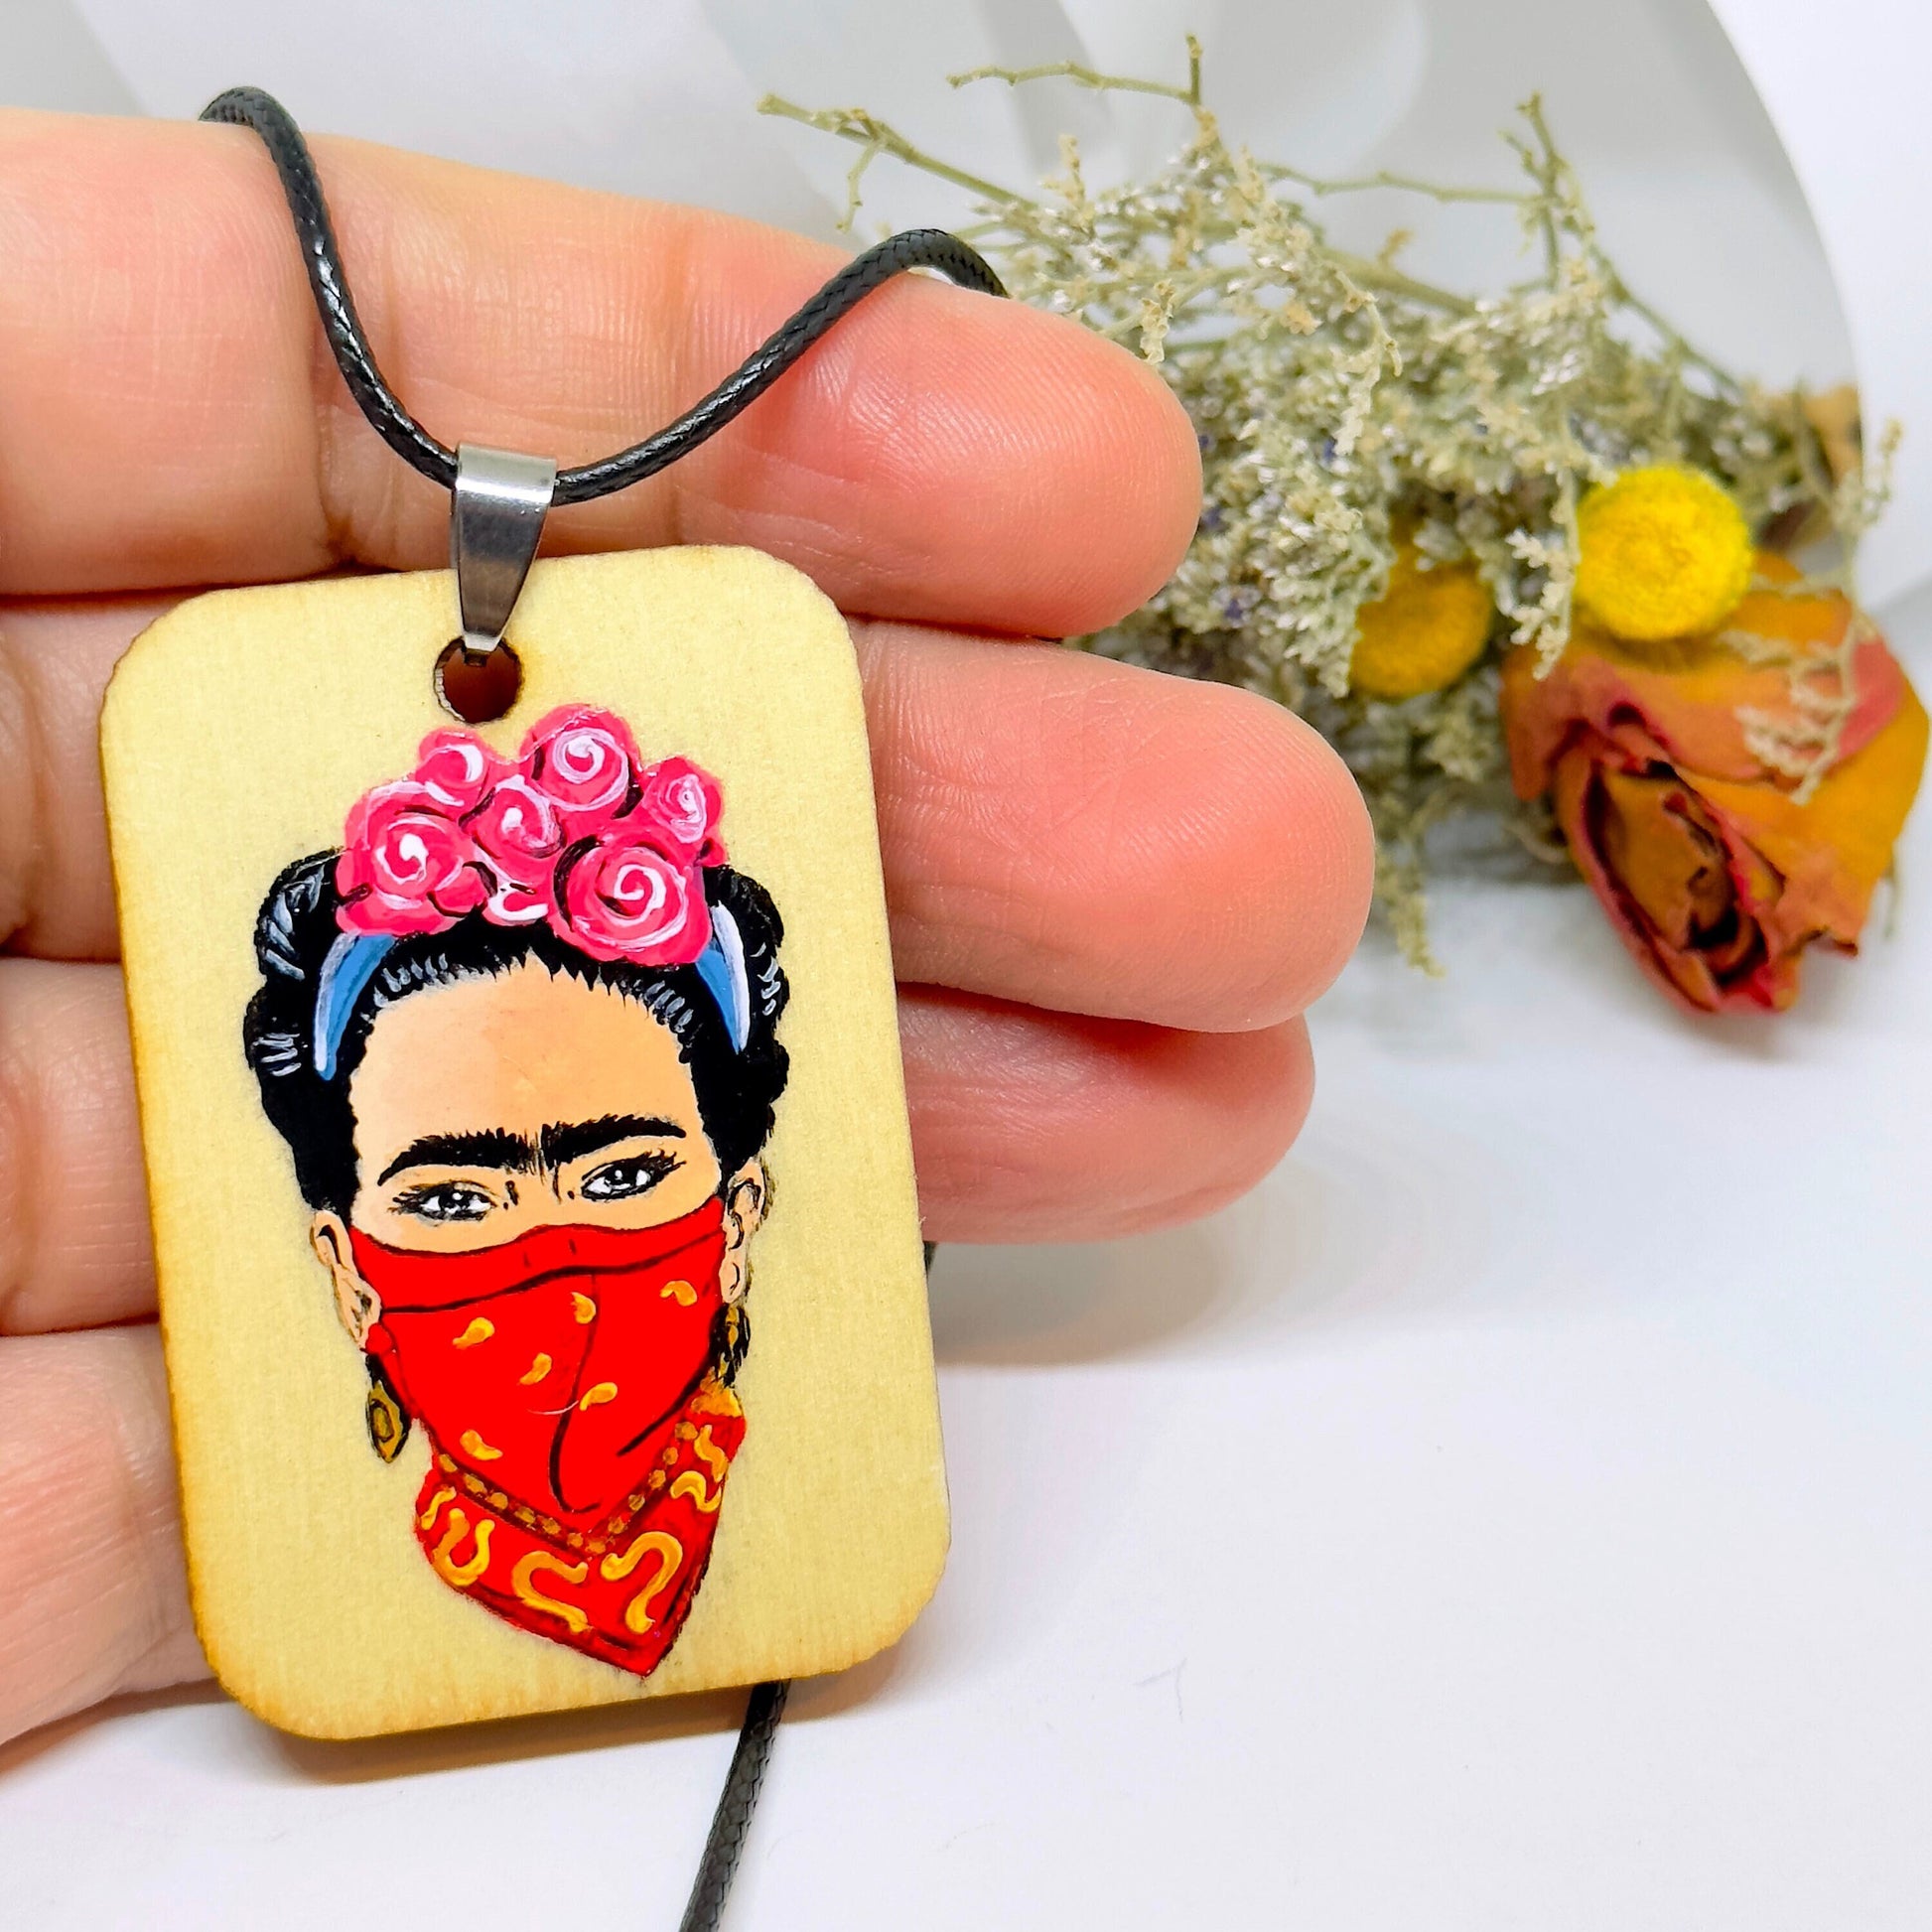 Rebel Frida Inspired Handpainted Wooden Pendant Necklace Fridalovers Art To Wear Fashion Feminist Mexican Artist Portrait Bohemian Accessory